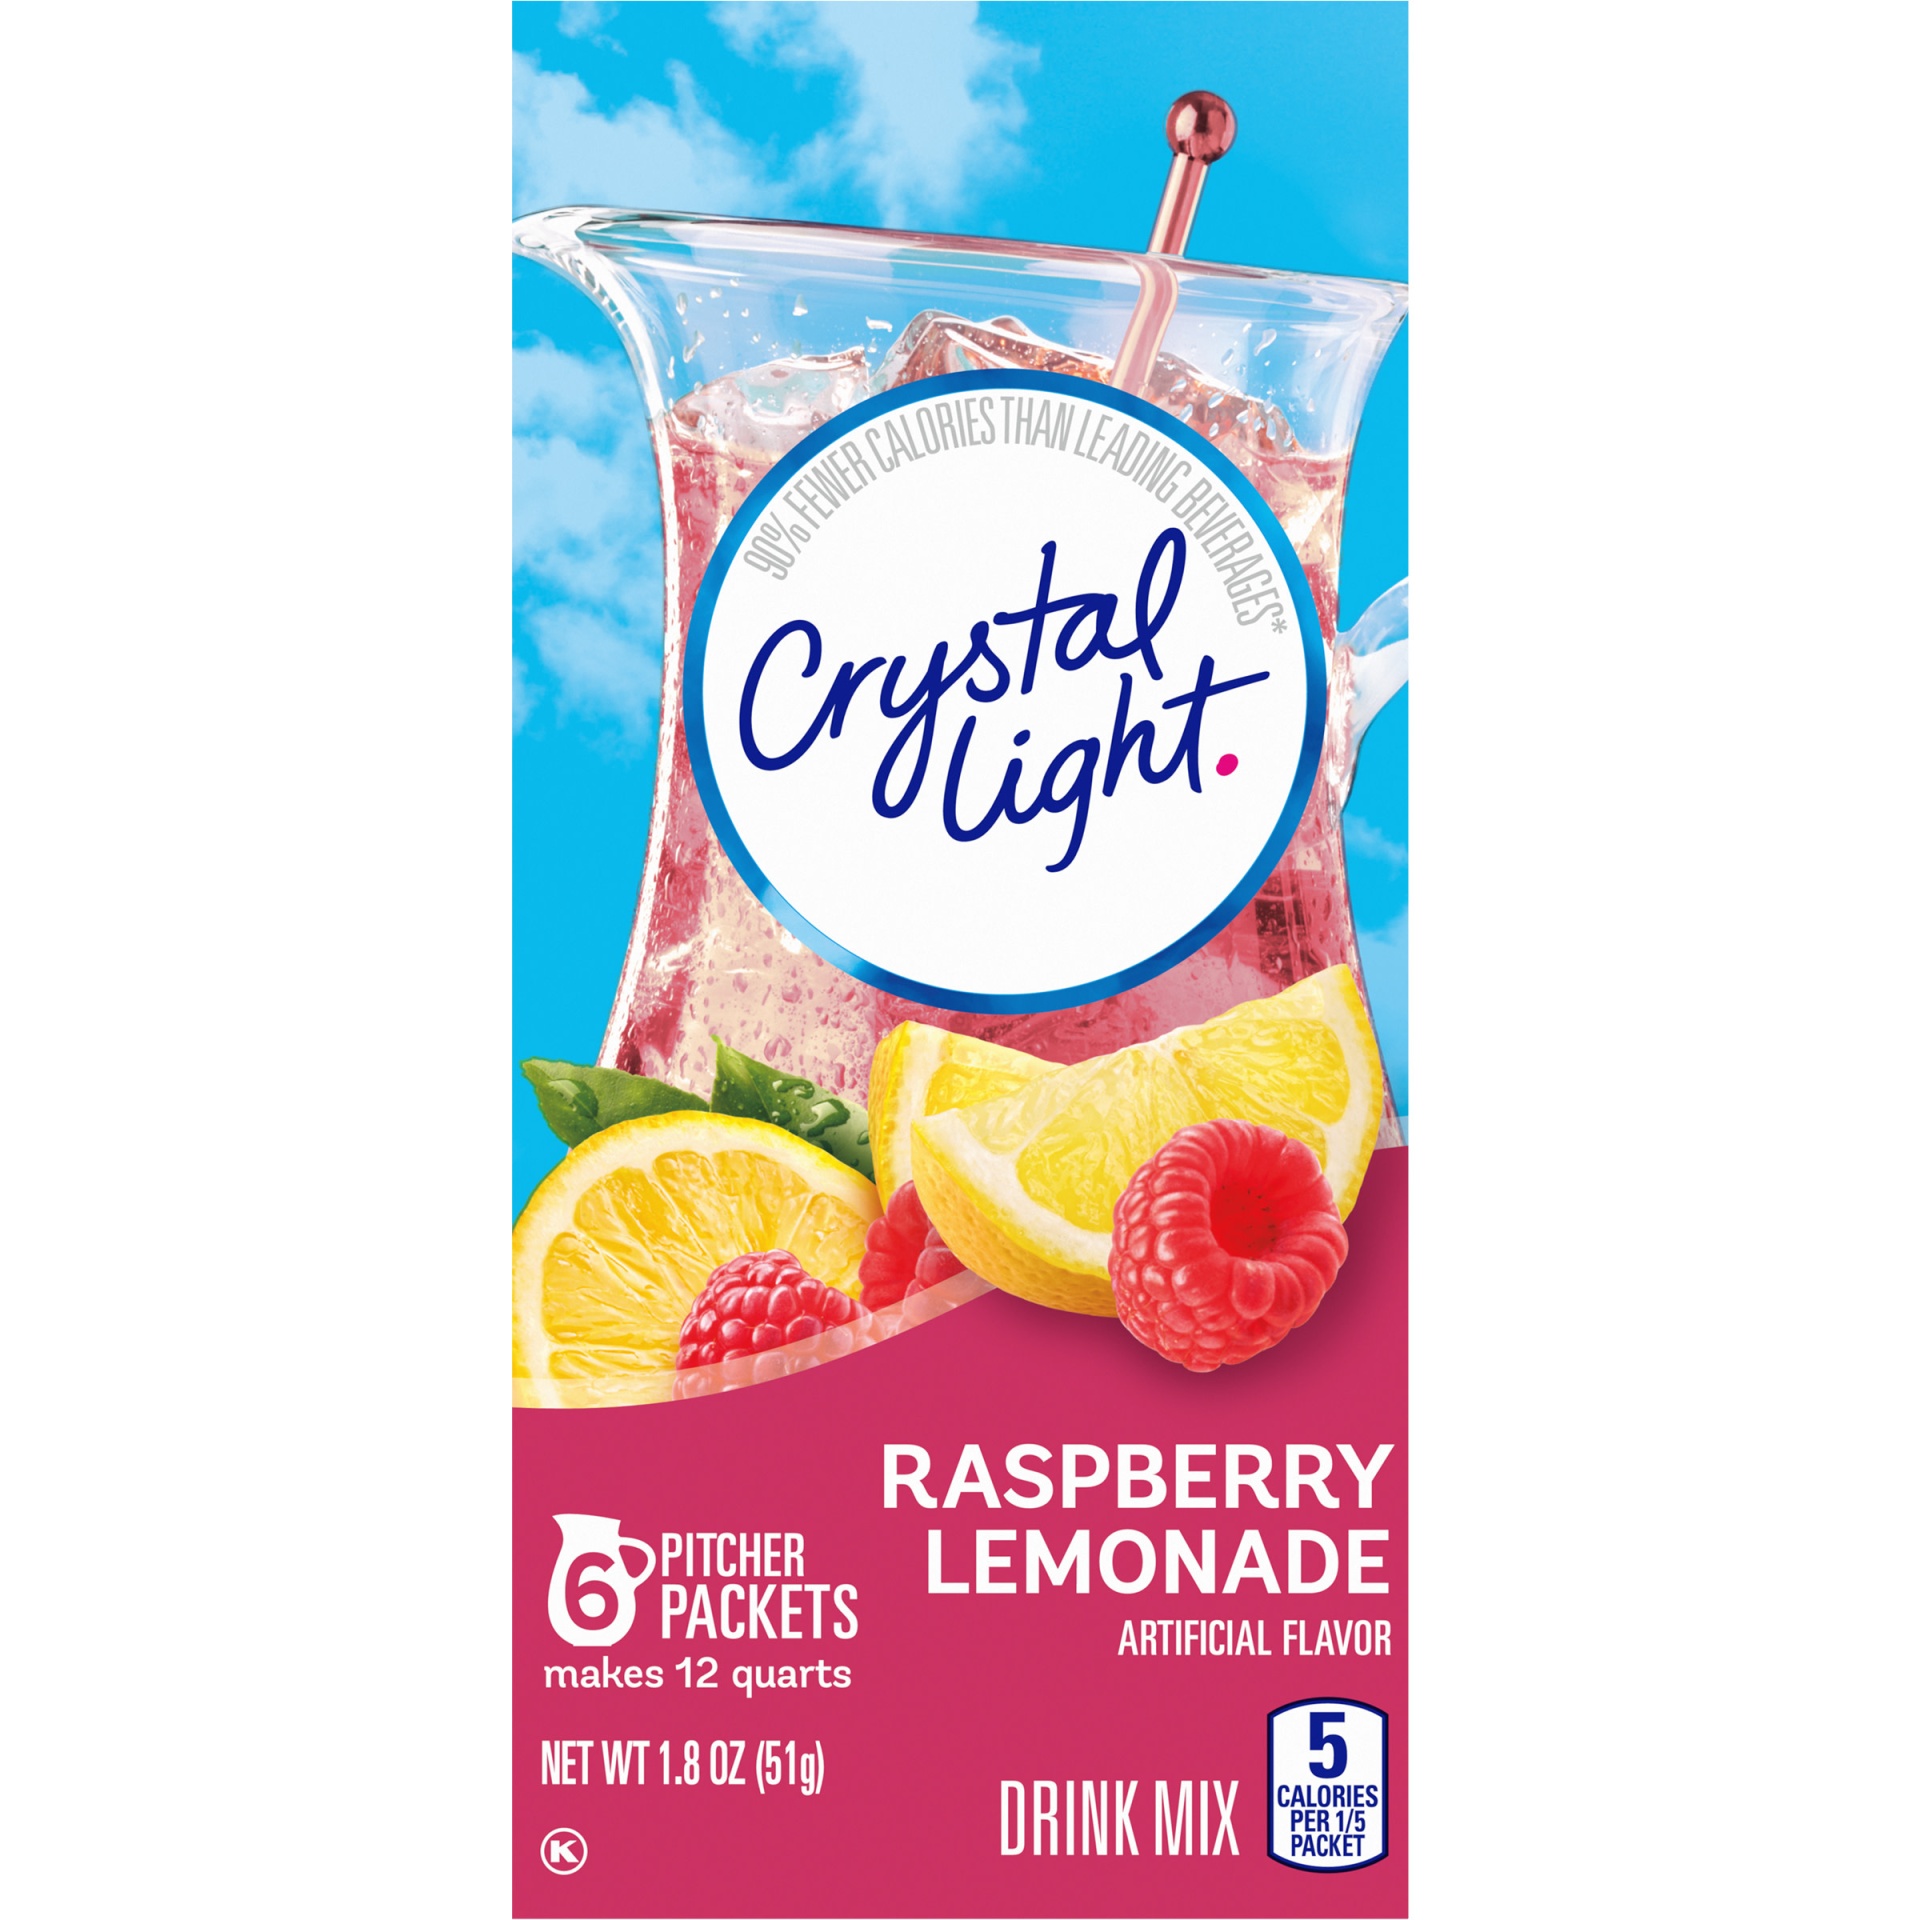 slide 5 of 7, Crystal Light Raspberry Lemonade Artificially Flavored Powdered Drink Mix Pitcher Packets, 6 ct; 1.8 oz